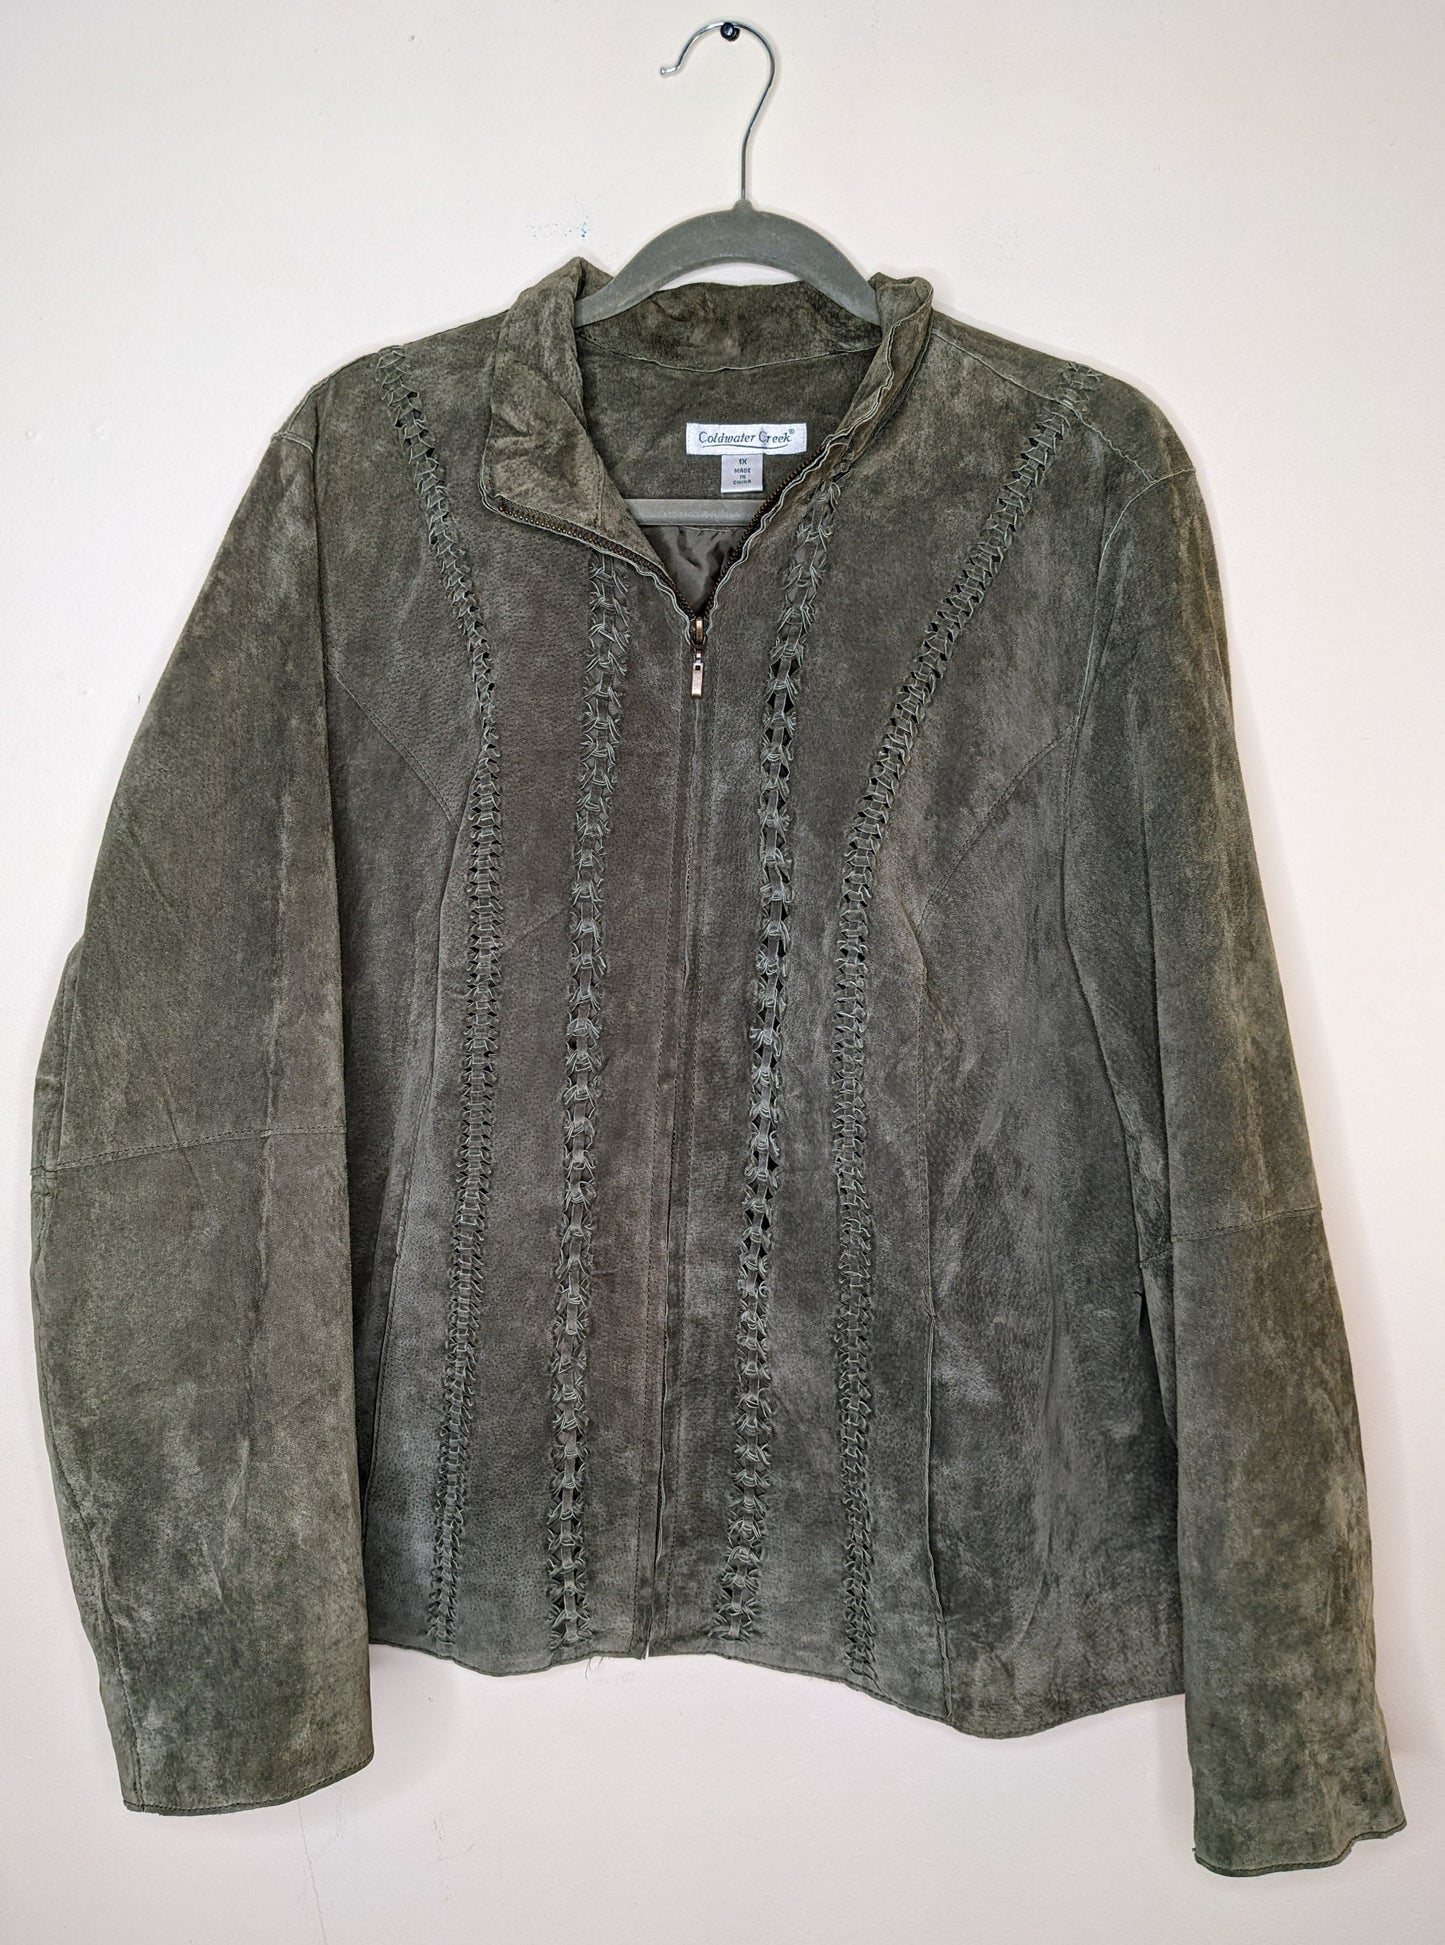 Coldwater Creek Olive Green Boho Suede Leather Braided Jacket - XL